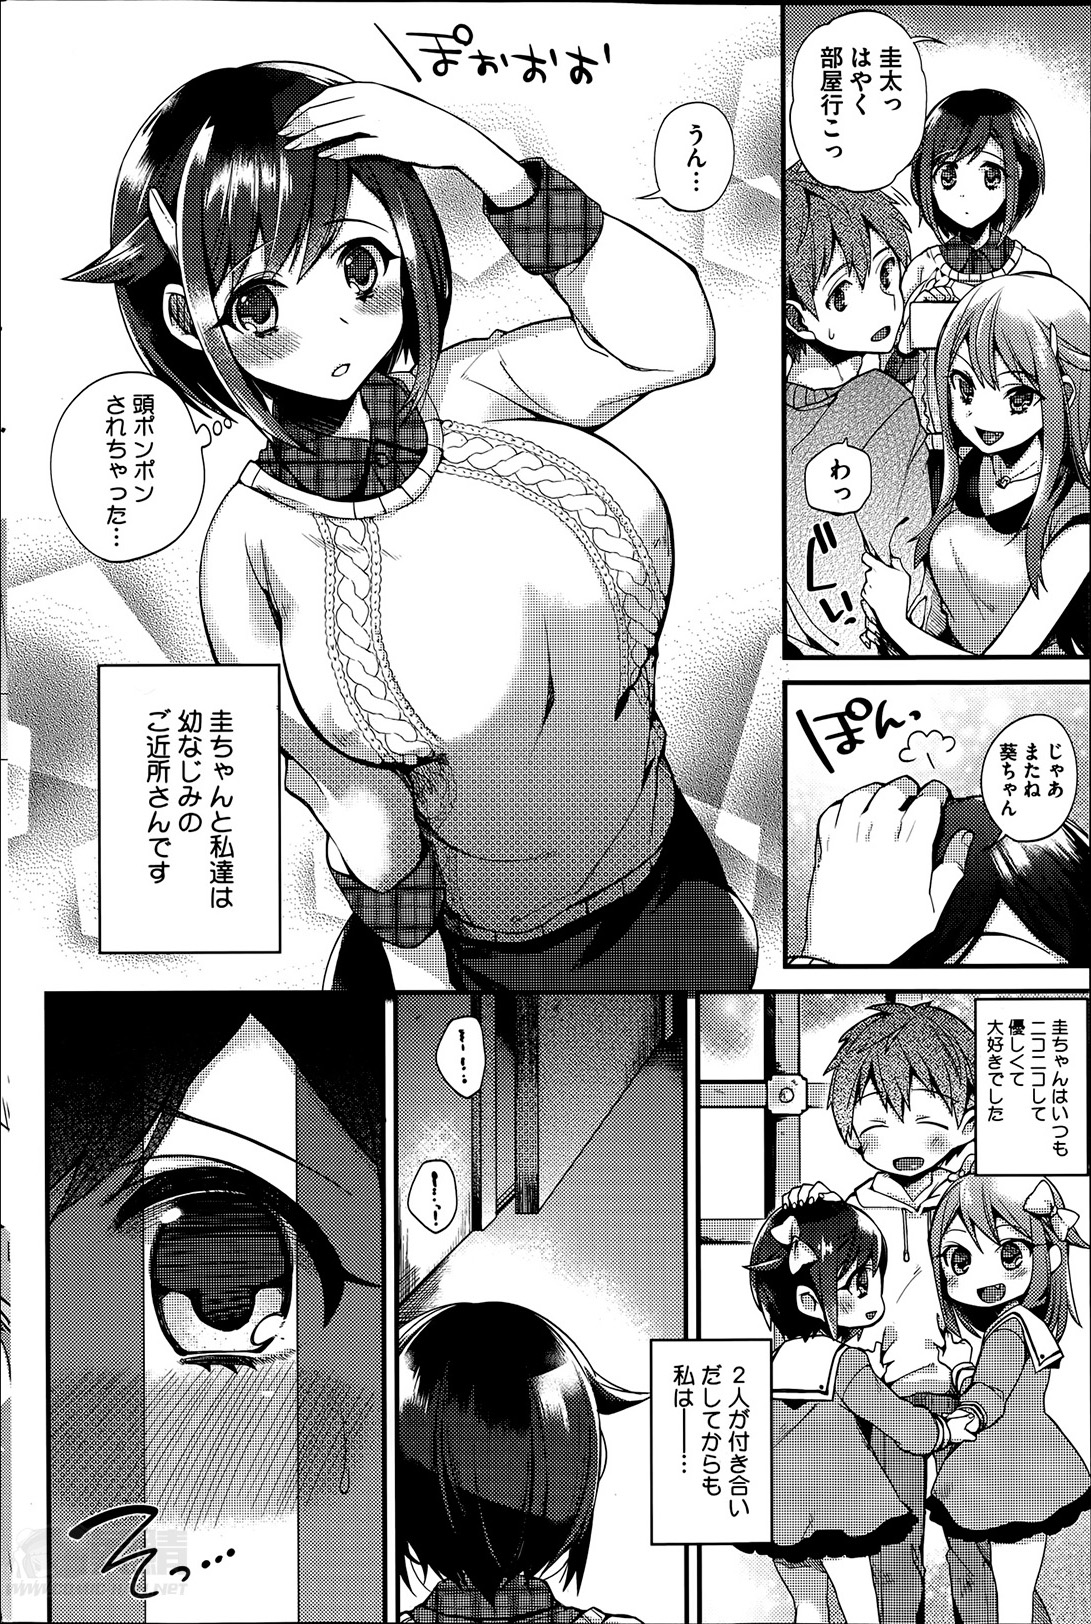 [Shindou] Sisters Conflict Ch.1-2 page 4 full